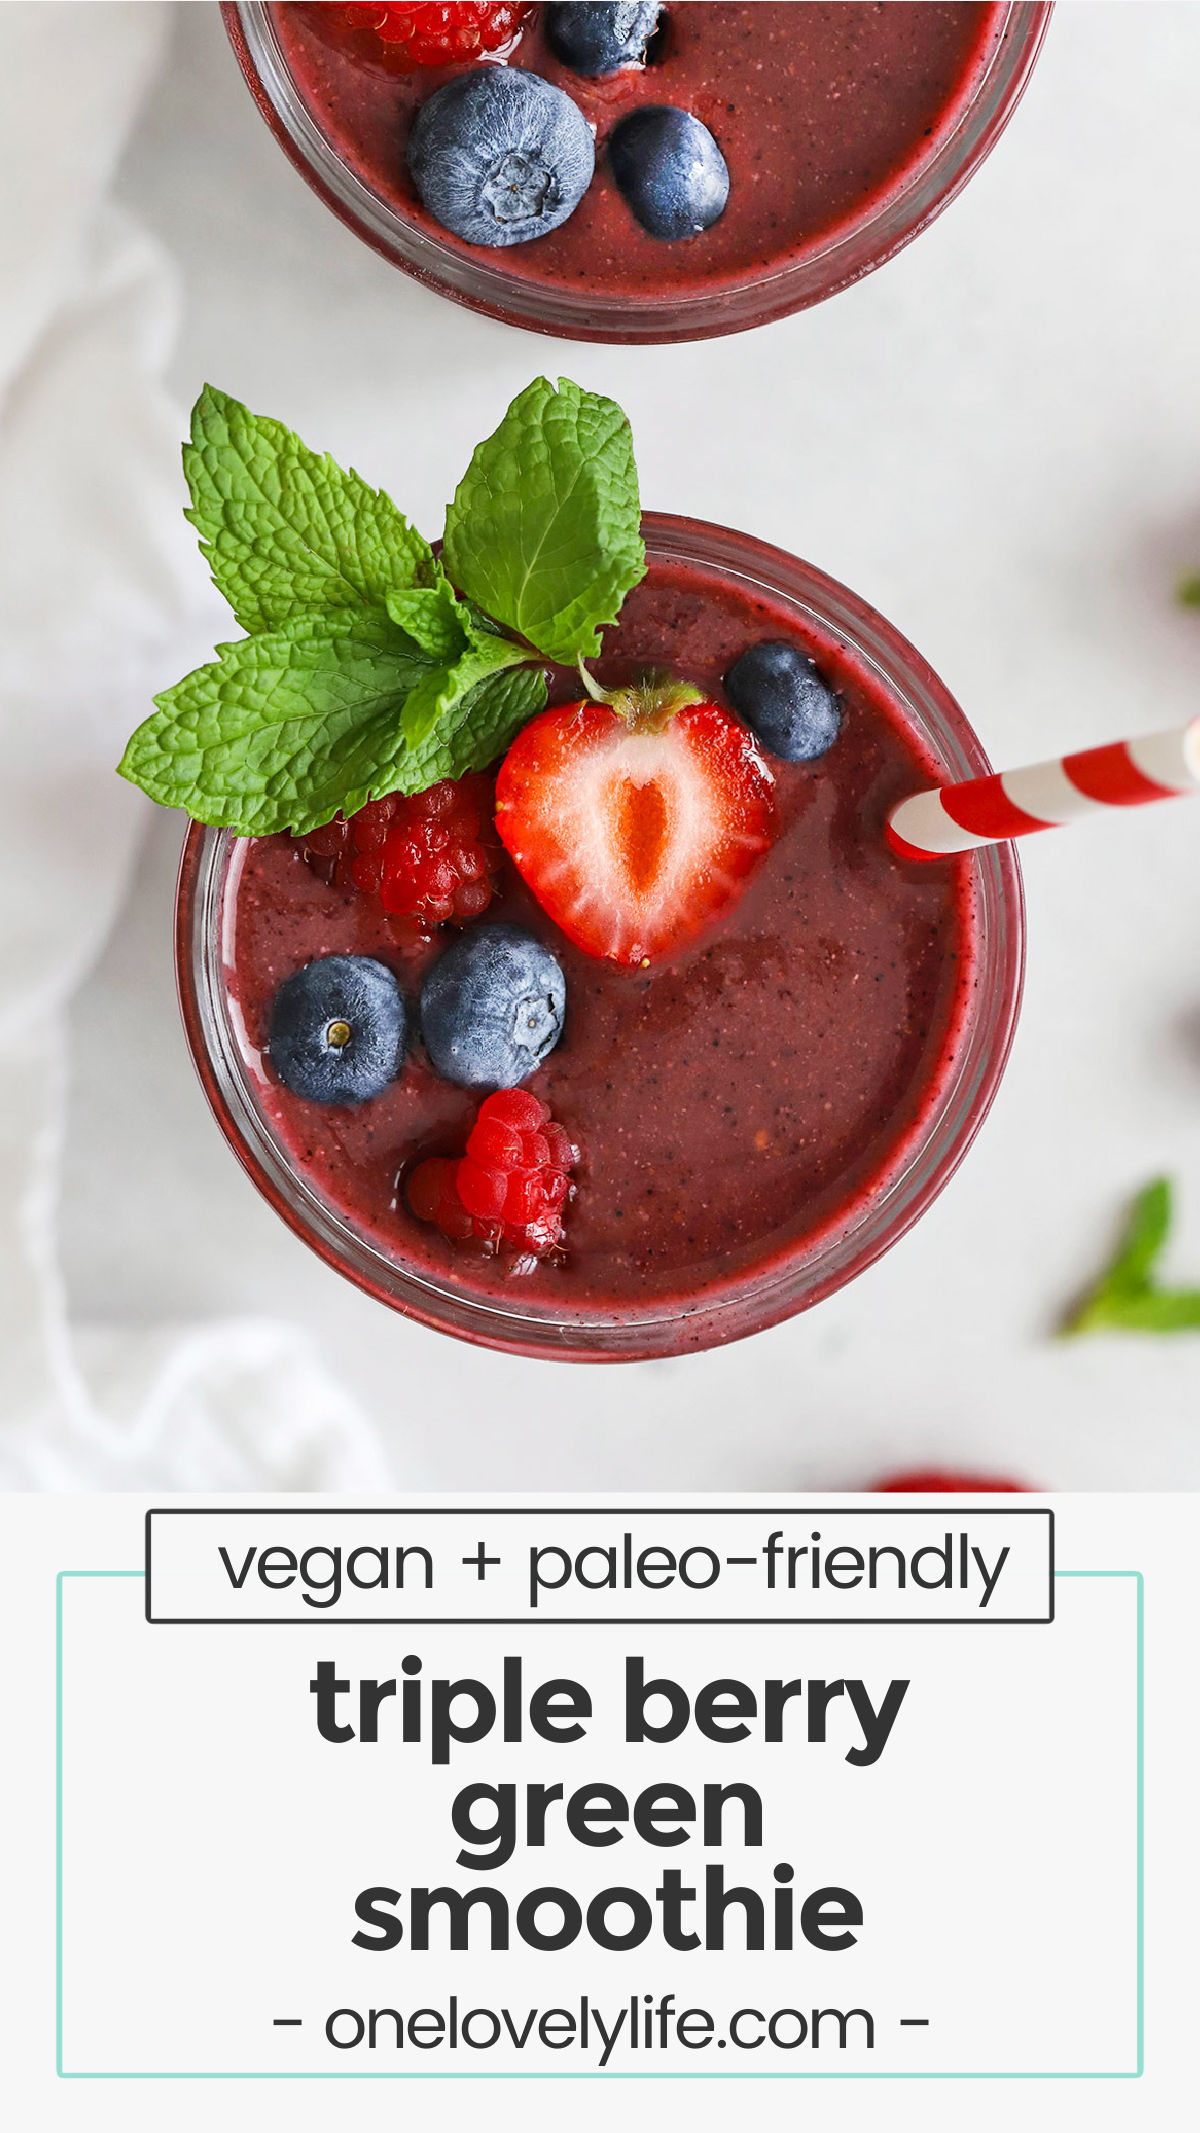 This Berry Green Smoothie - This kid-friendly recipe is a perfect intro to green smoothies. It's fresh, sweet & delicious! (paleo & vegan) // kid friendly smoothie // kids green smoothie // kids berry smoothie // healthy smoothie recipe // berry smoothie recipe / green smoothie with berries / vegan green smoothie / paleo smoothie / red smoothie / purple smoothie / triple berry smoothie / triple berry green smoothie